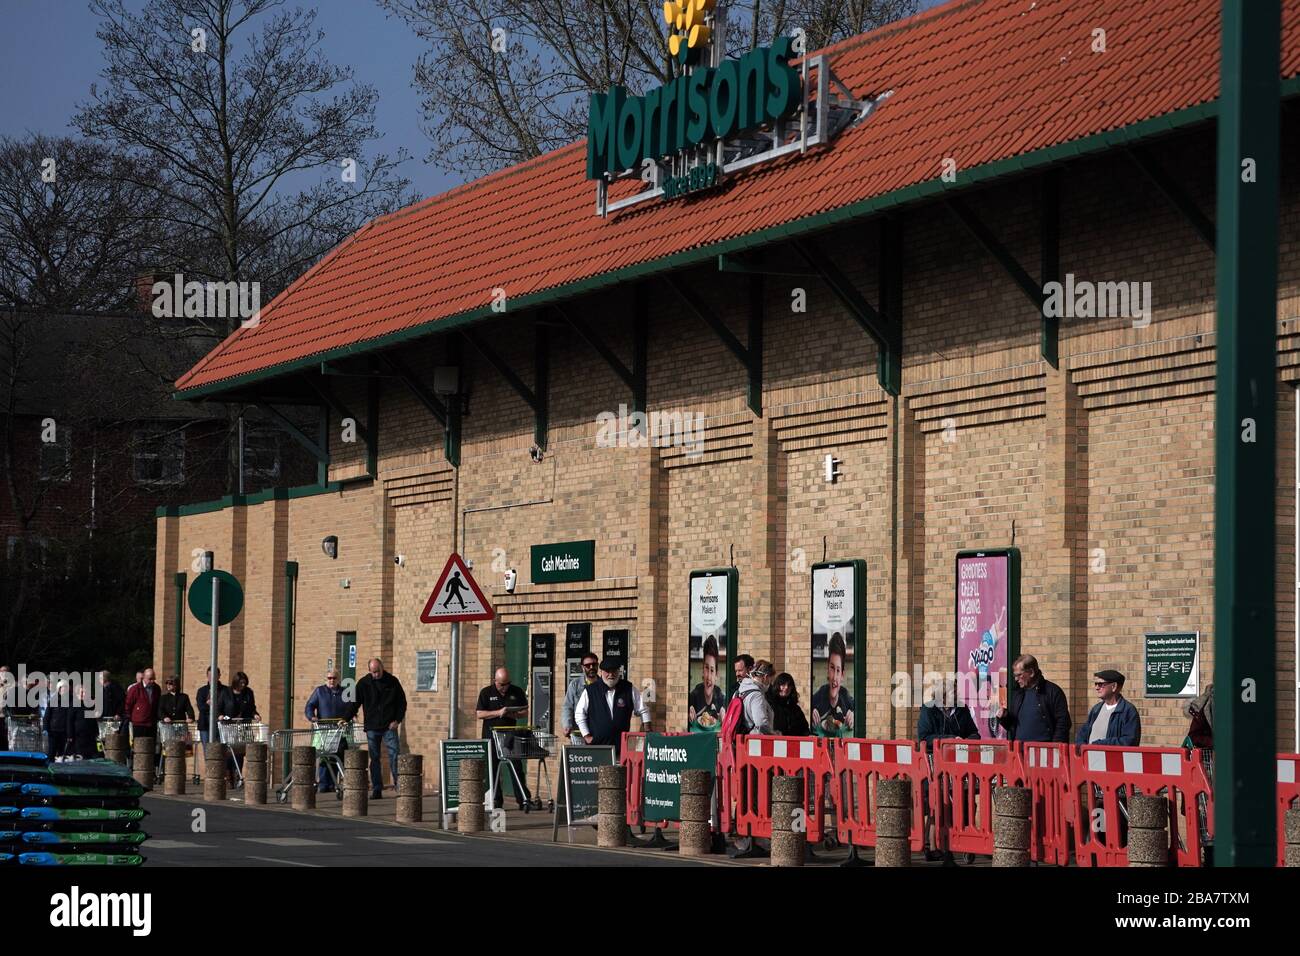 Customers social distancing in the queue outside Morrisons supermarket in Whitley Bay, Tyne and Wear, after Prime Minister Boris Johnson put the UK in lockdown to help curb the spread of the coronavirus. Stock Photo